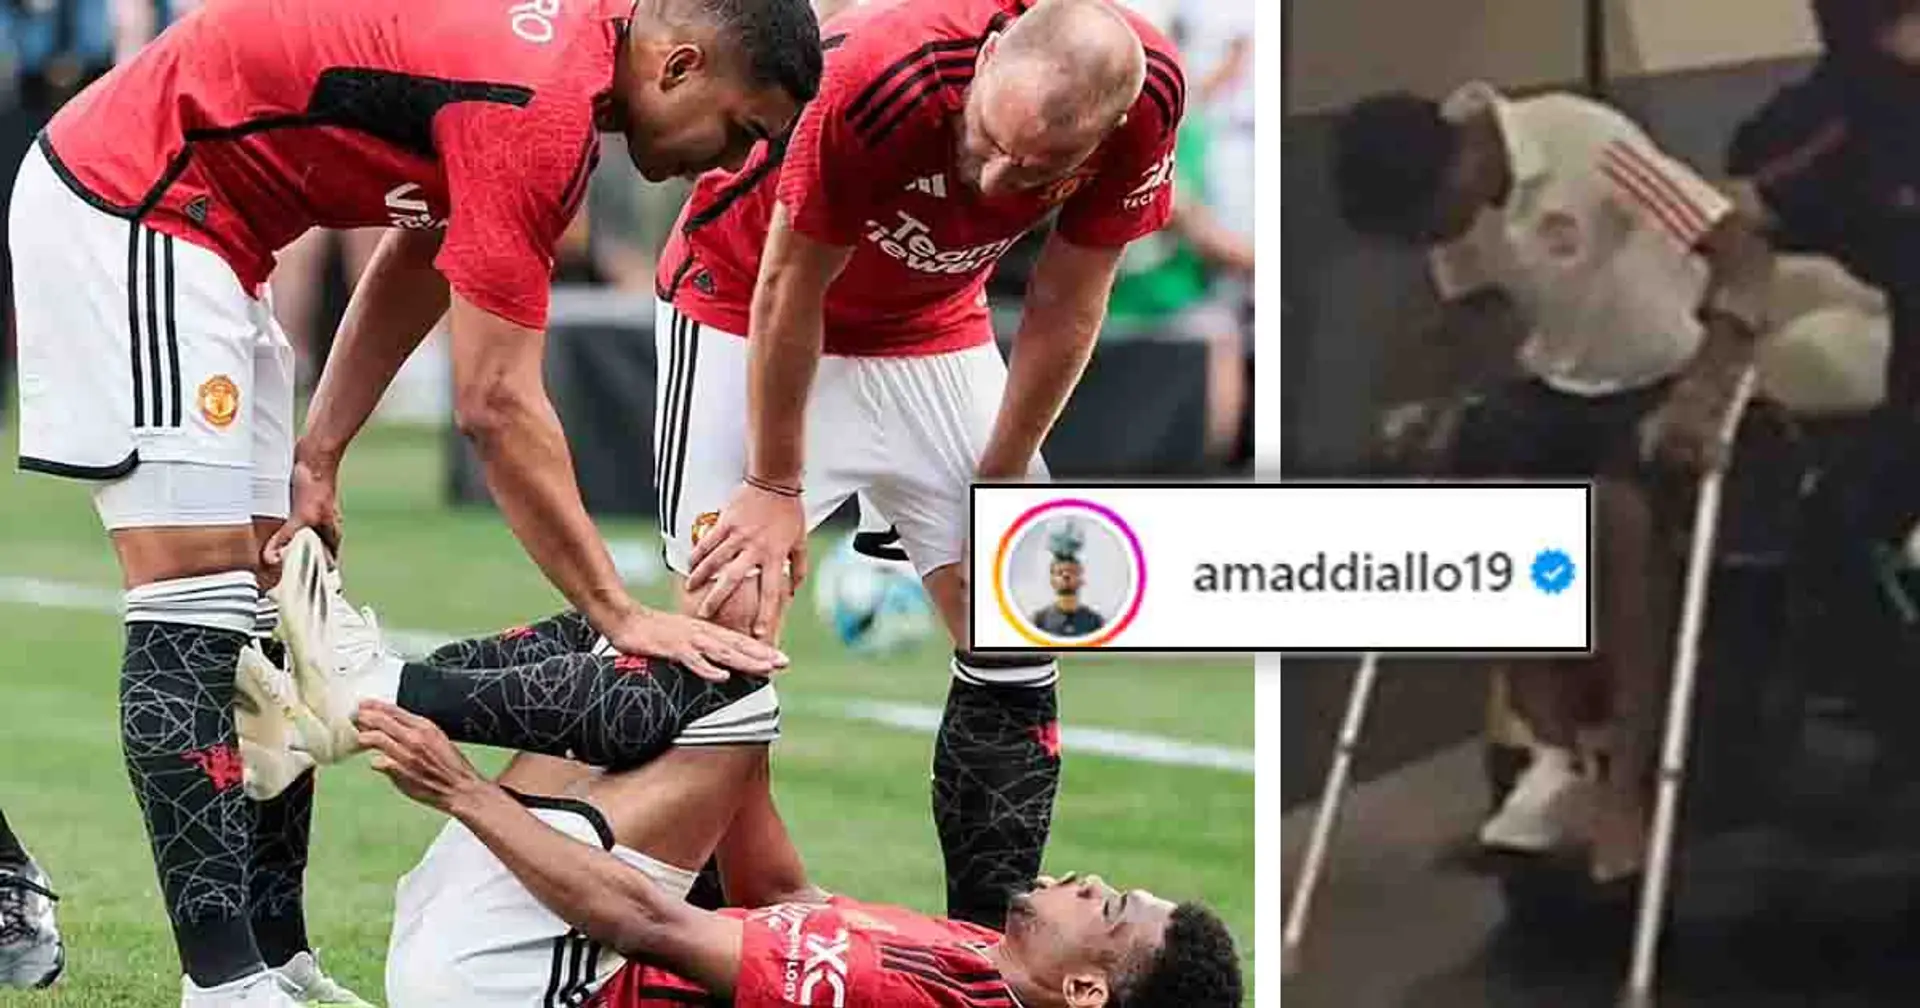 Amad Diallo gives update on injury situation after leaving Arsenal game in crutches